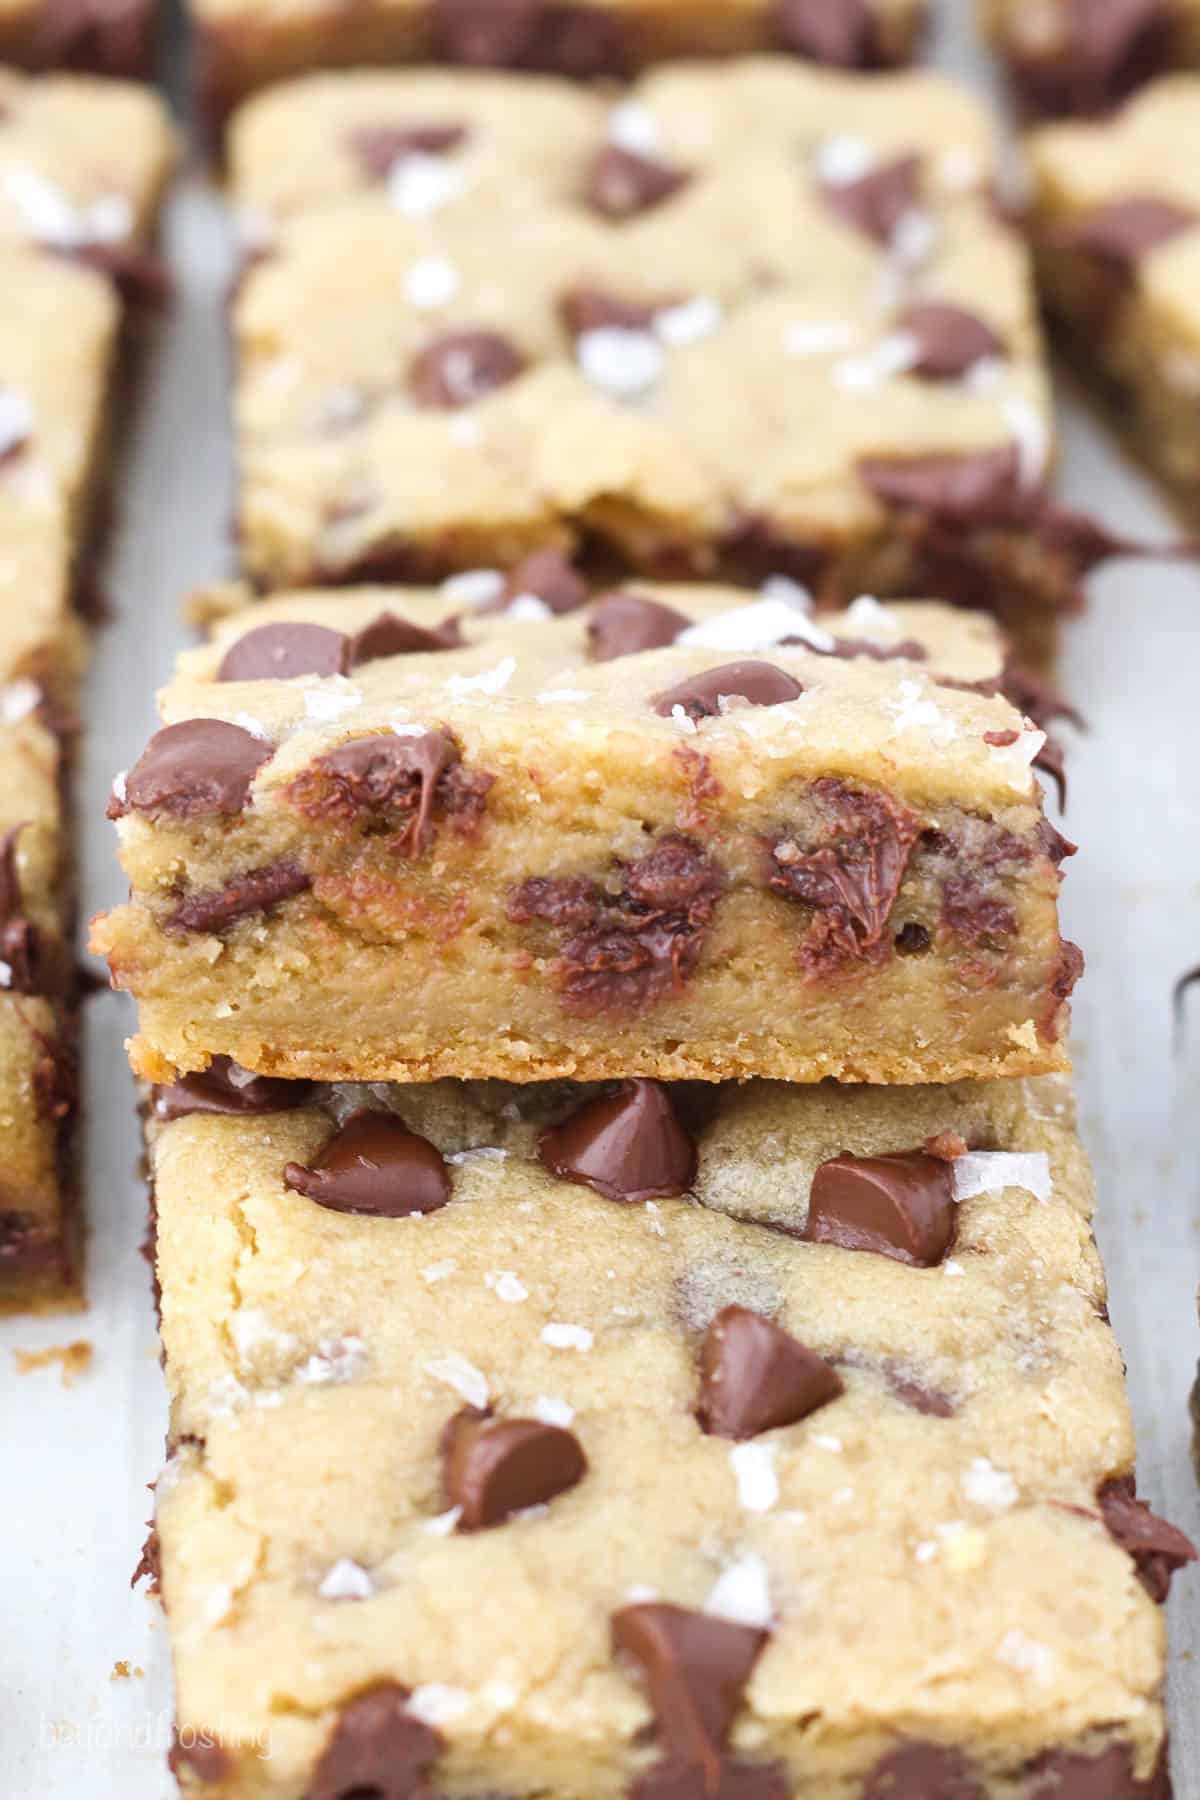 Overhead view of three chocolate chip cookie bars